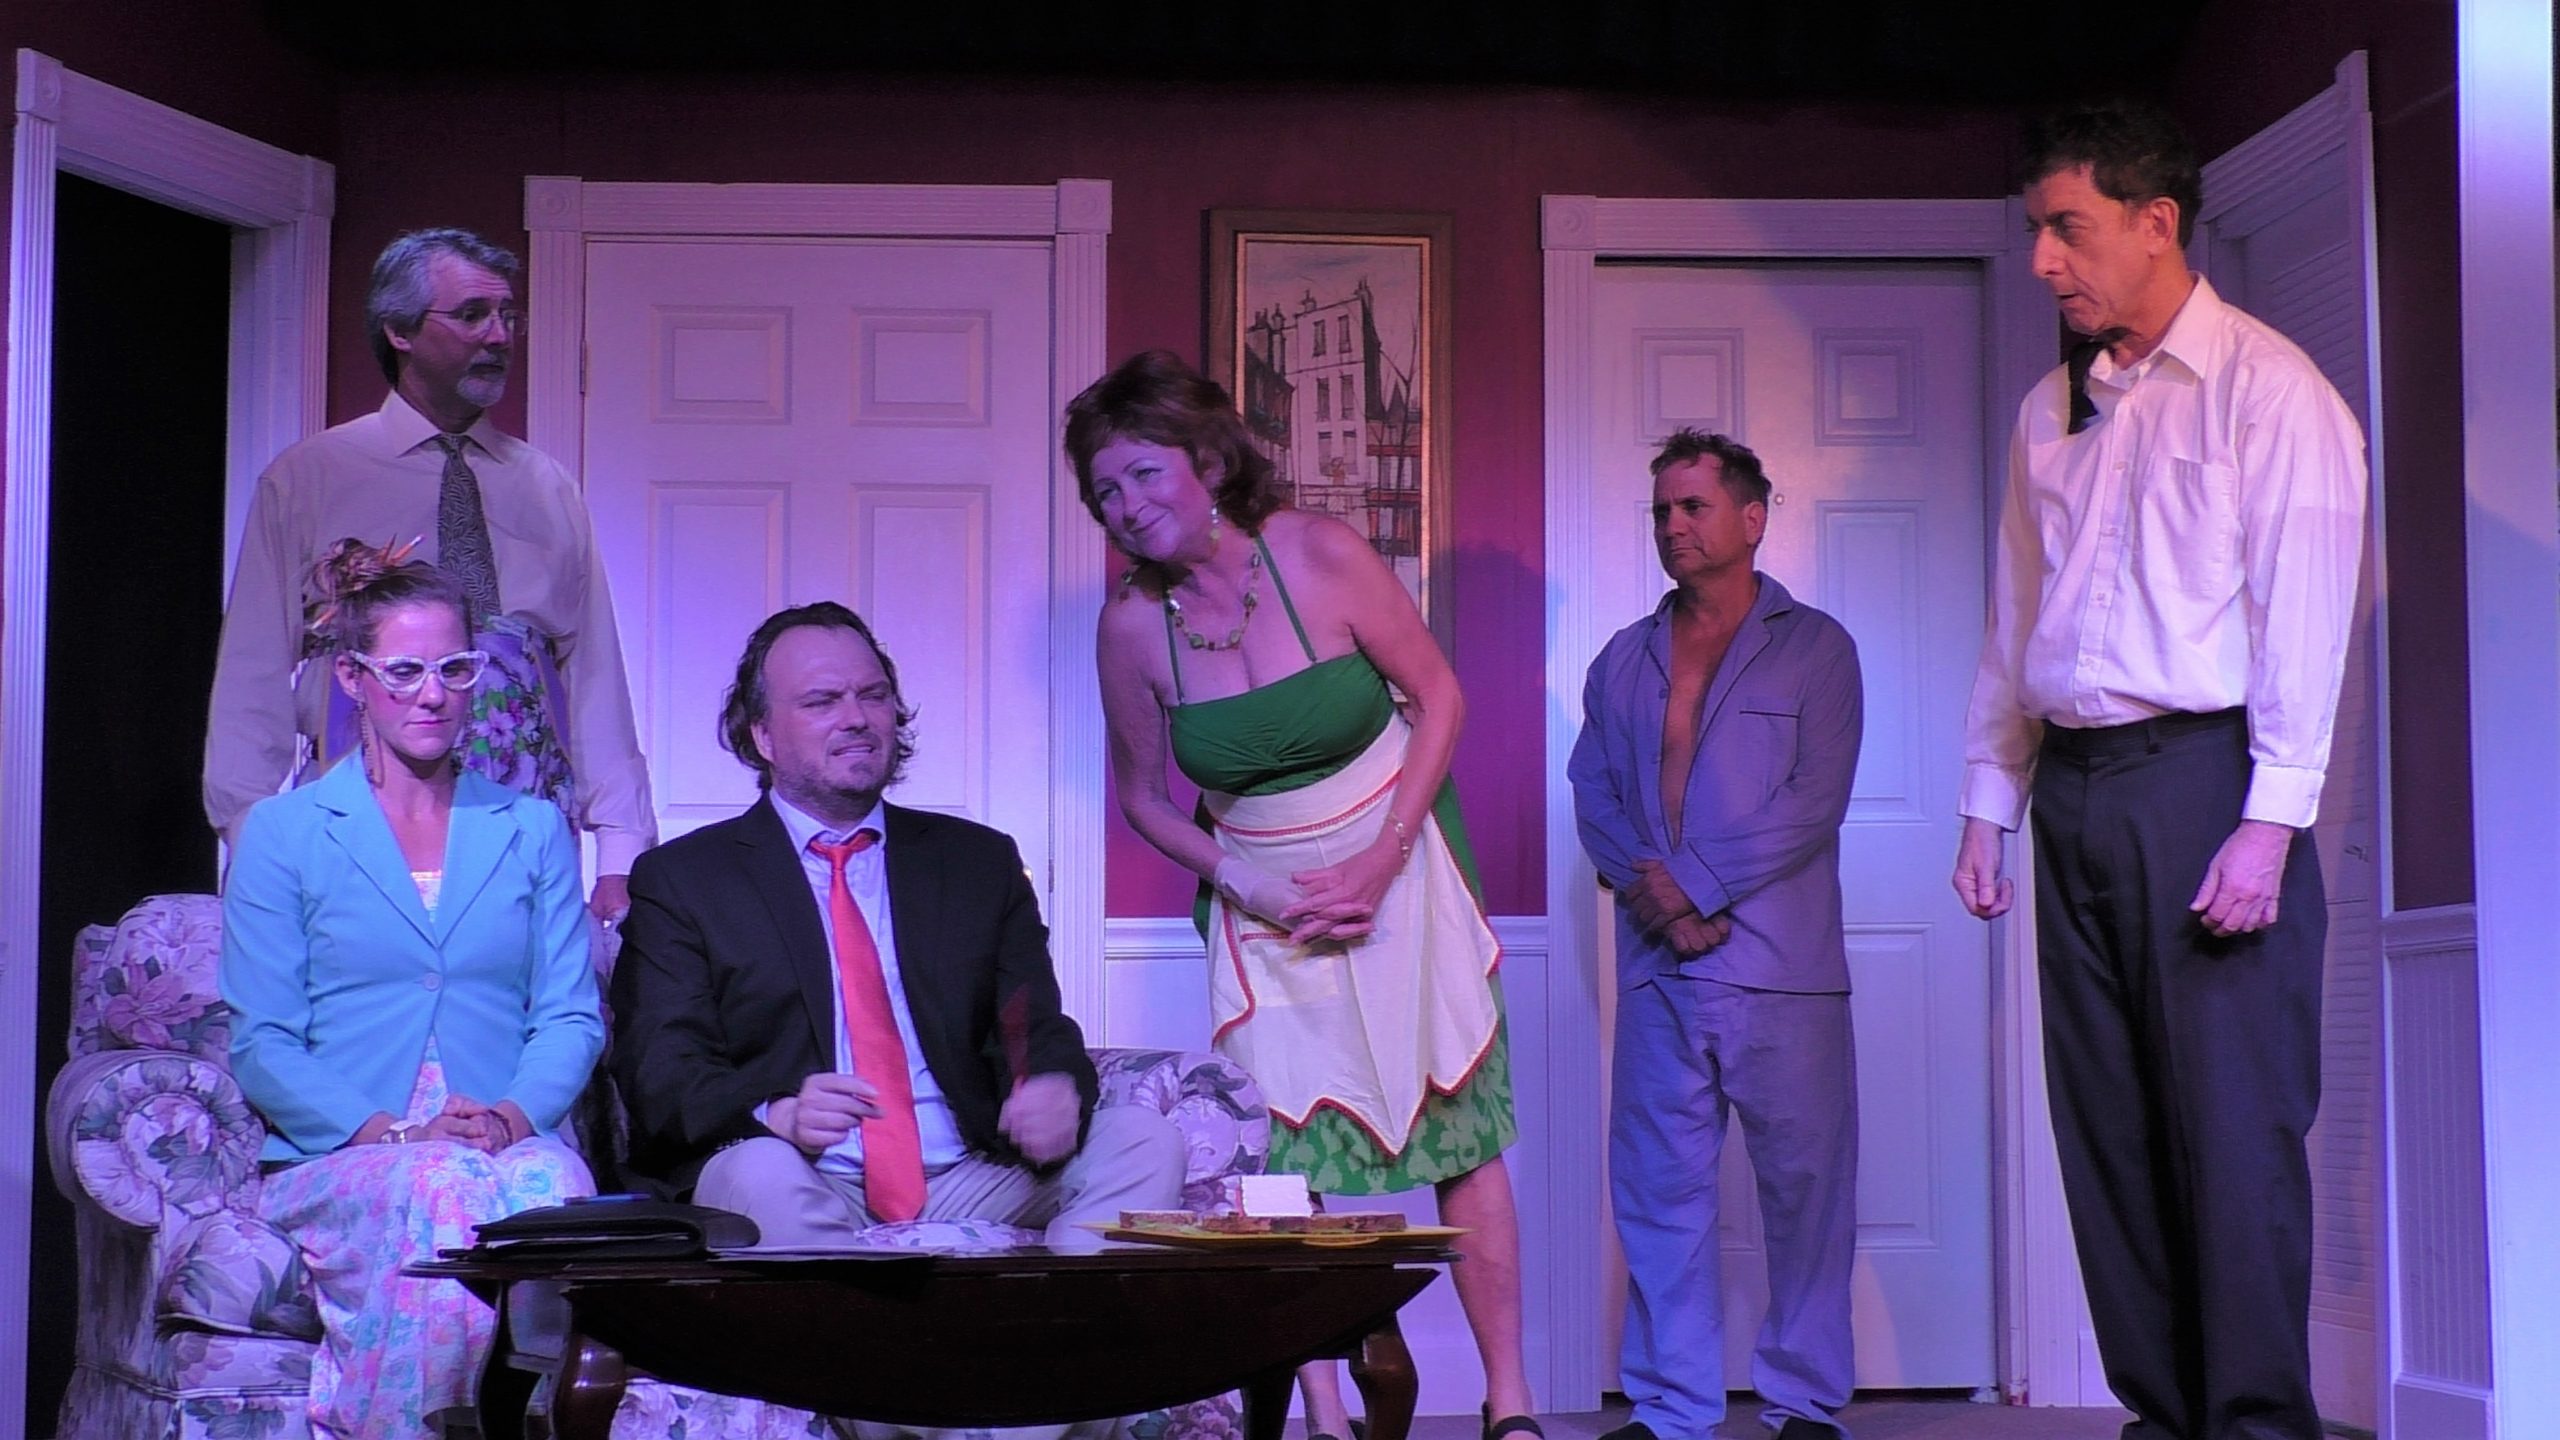 A female wearing a green jack and a male wearing a suite and red tie sit on the sofa and interact with a female wearing a green dress, a male in blue pajamas, and a male in a white shirt and black pants all standing